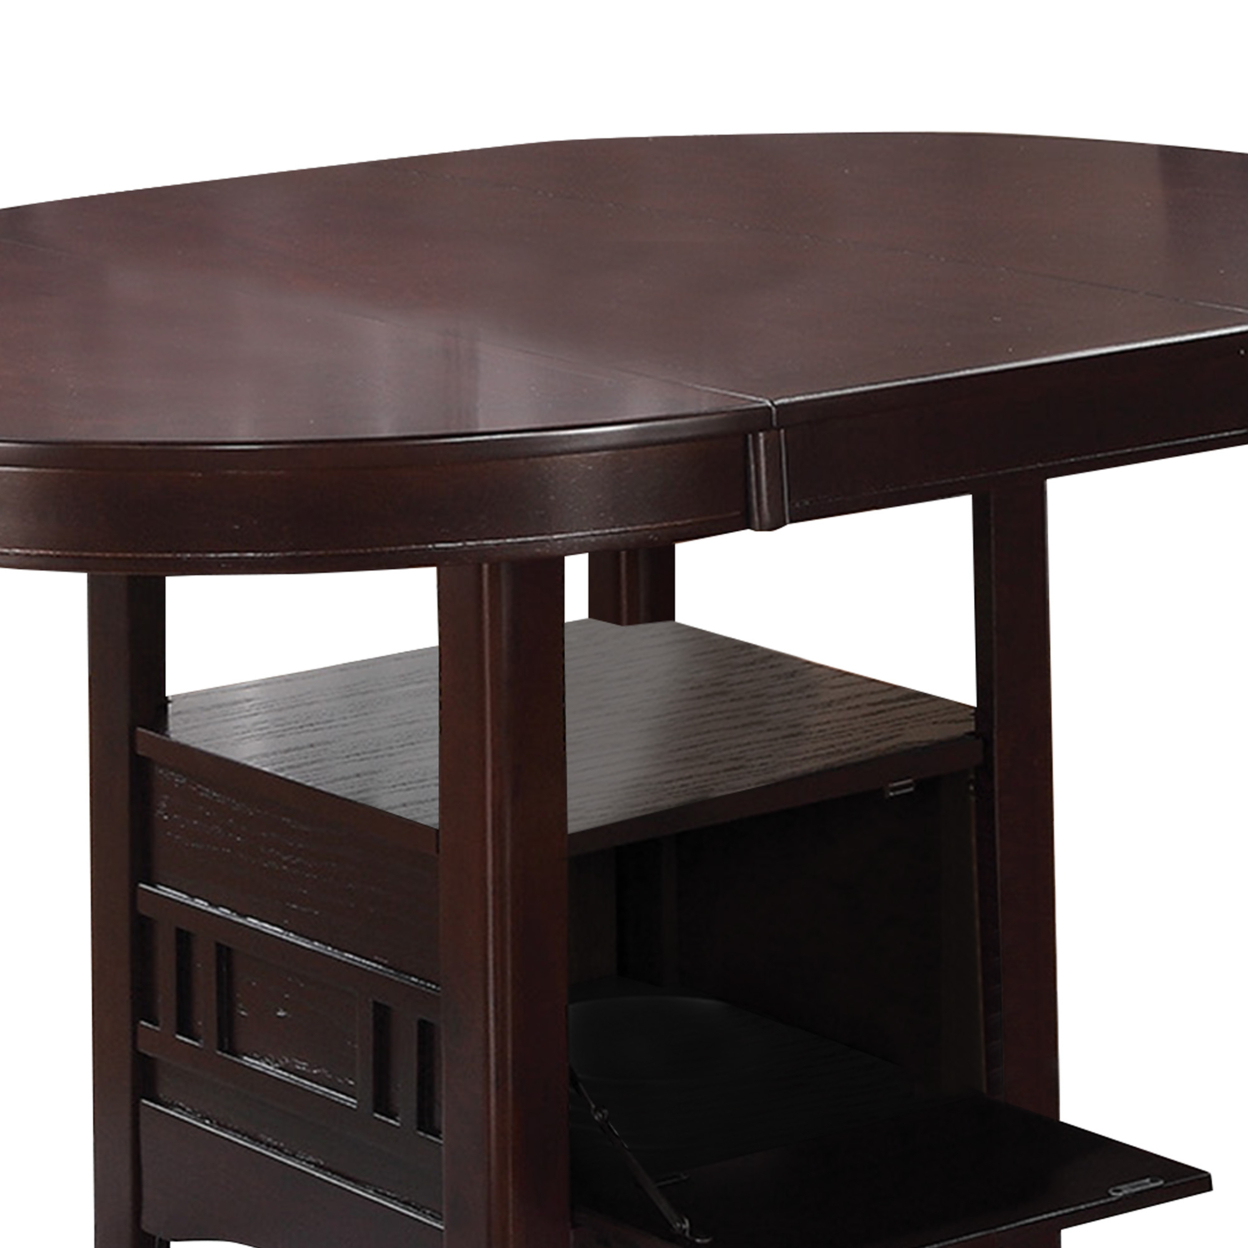 Wooden Dining Table With Storage Compartment, Espresso Brown- Saltoro Sherpi